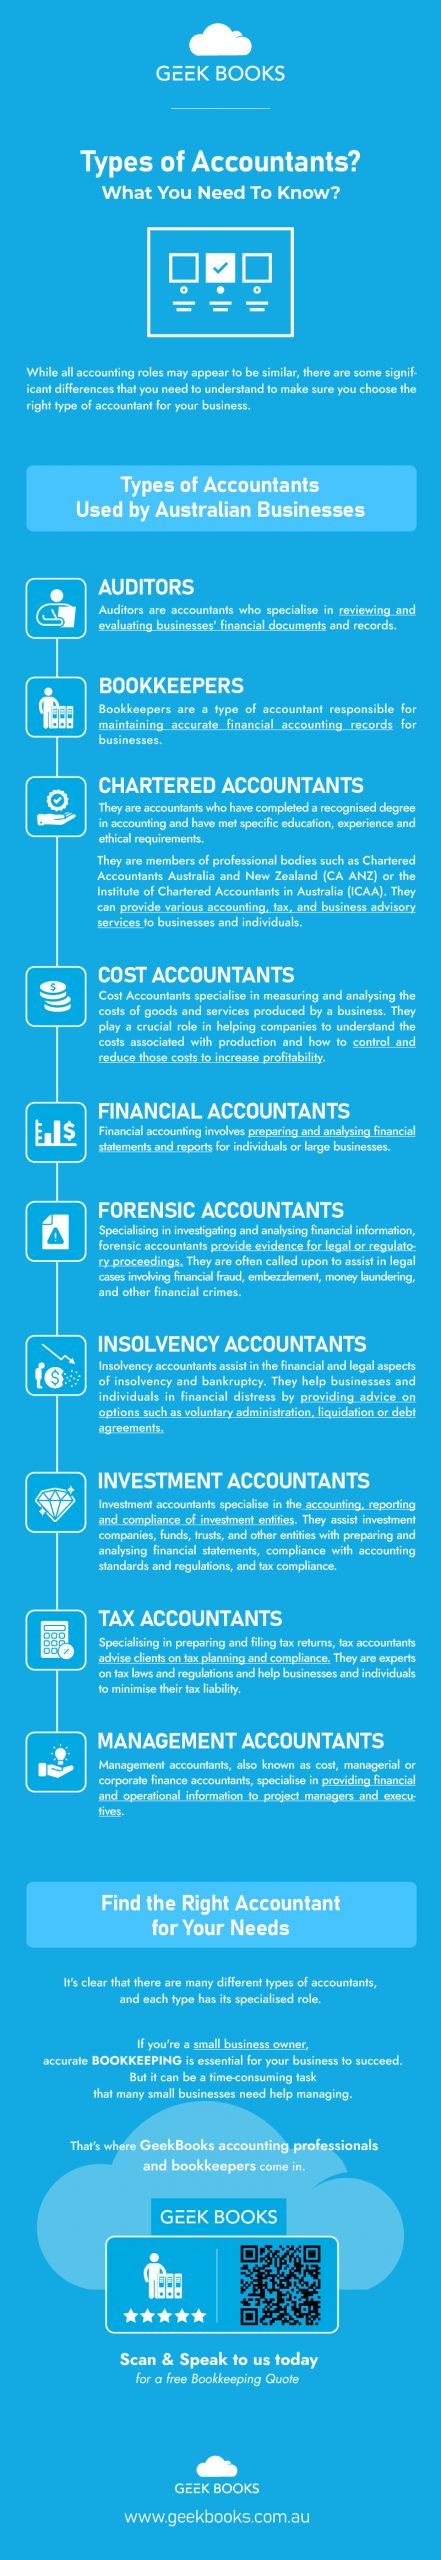 Types of Accountants Used by Australian Businesses Infographic